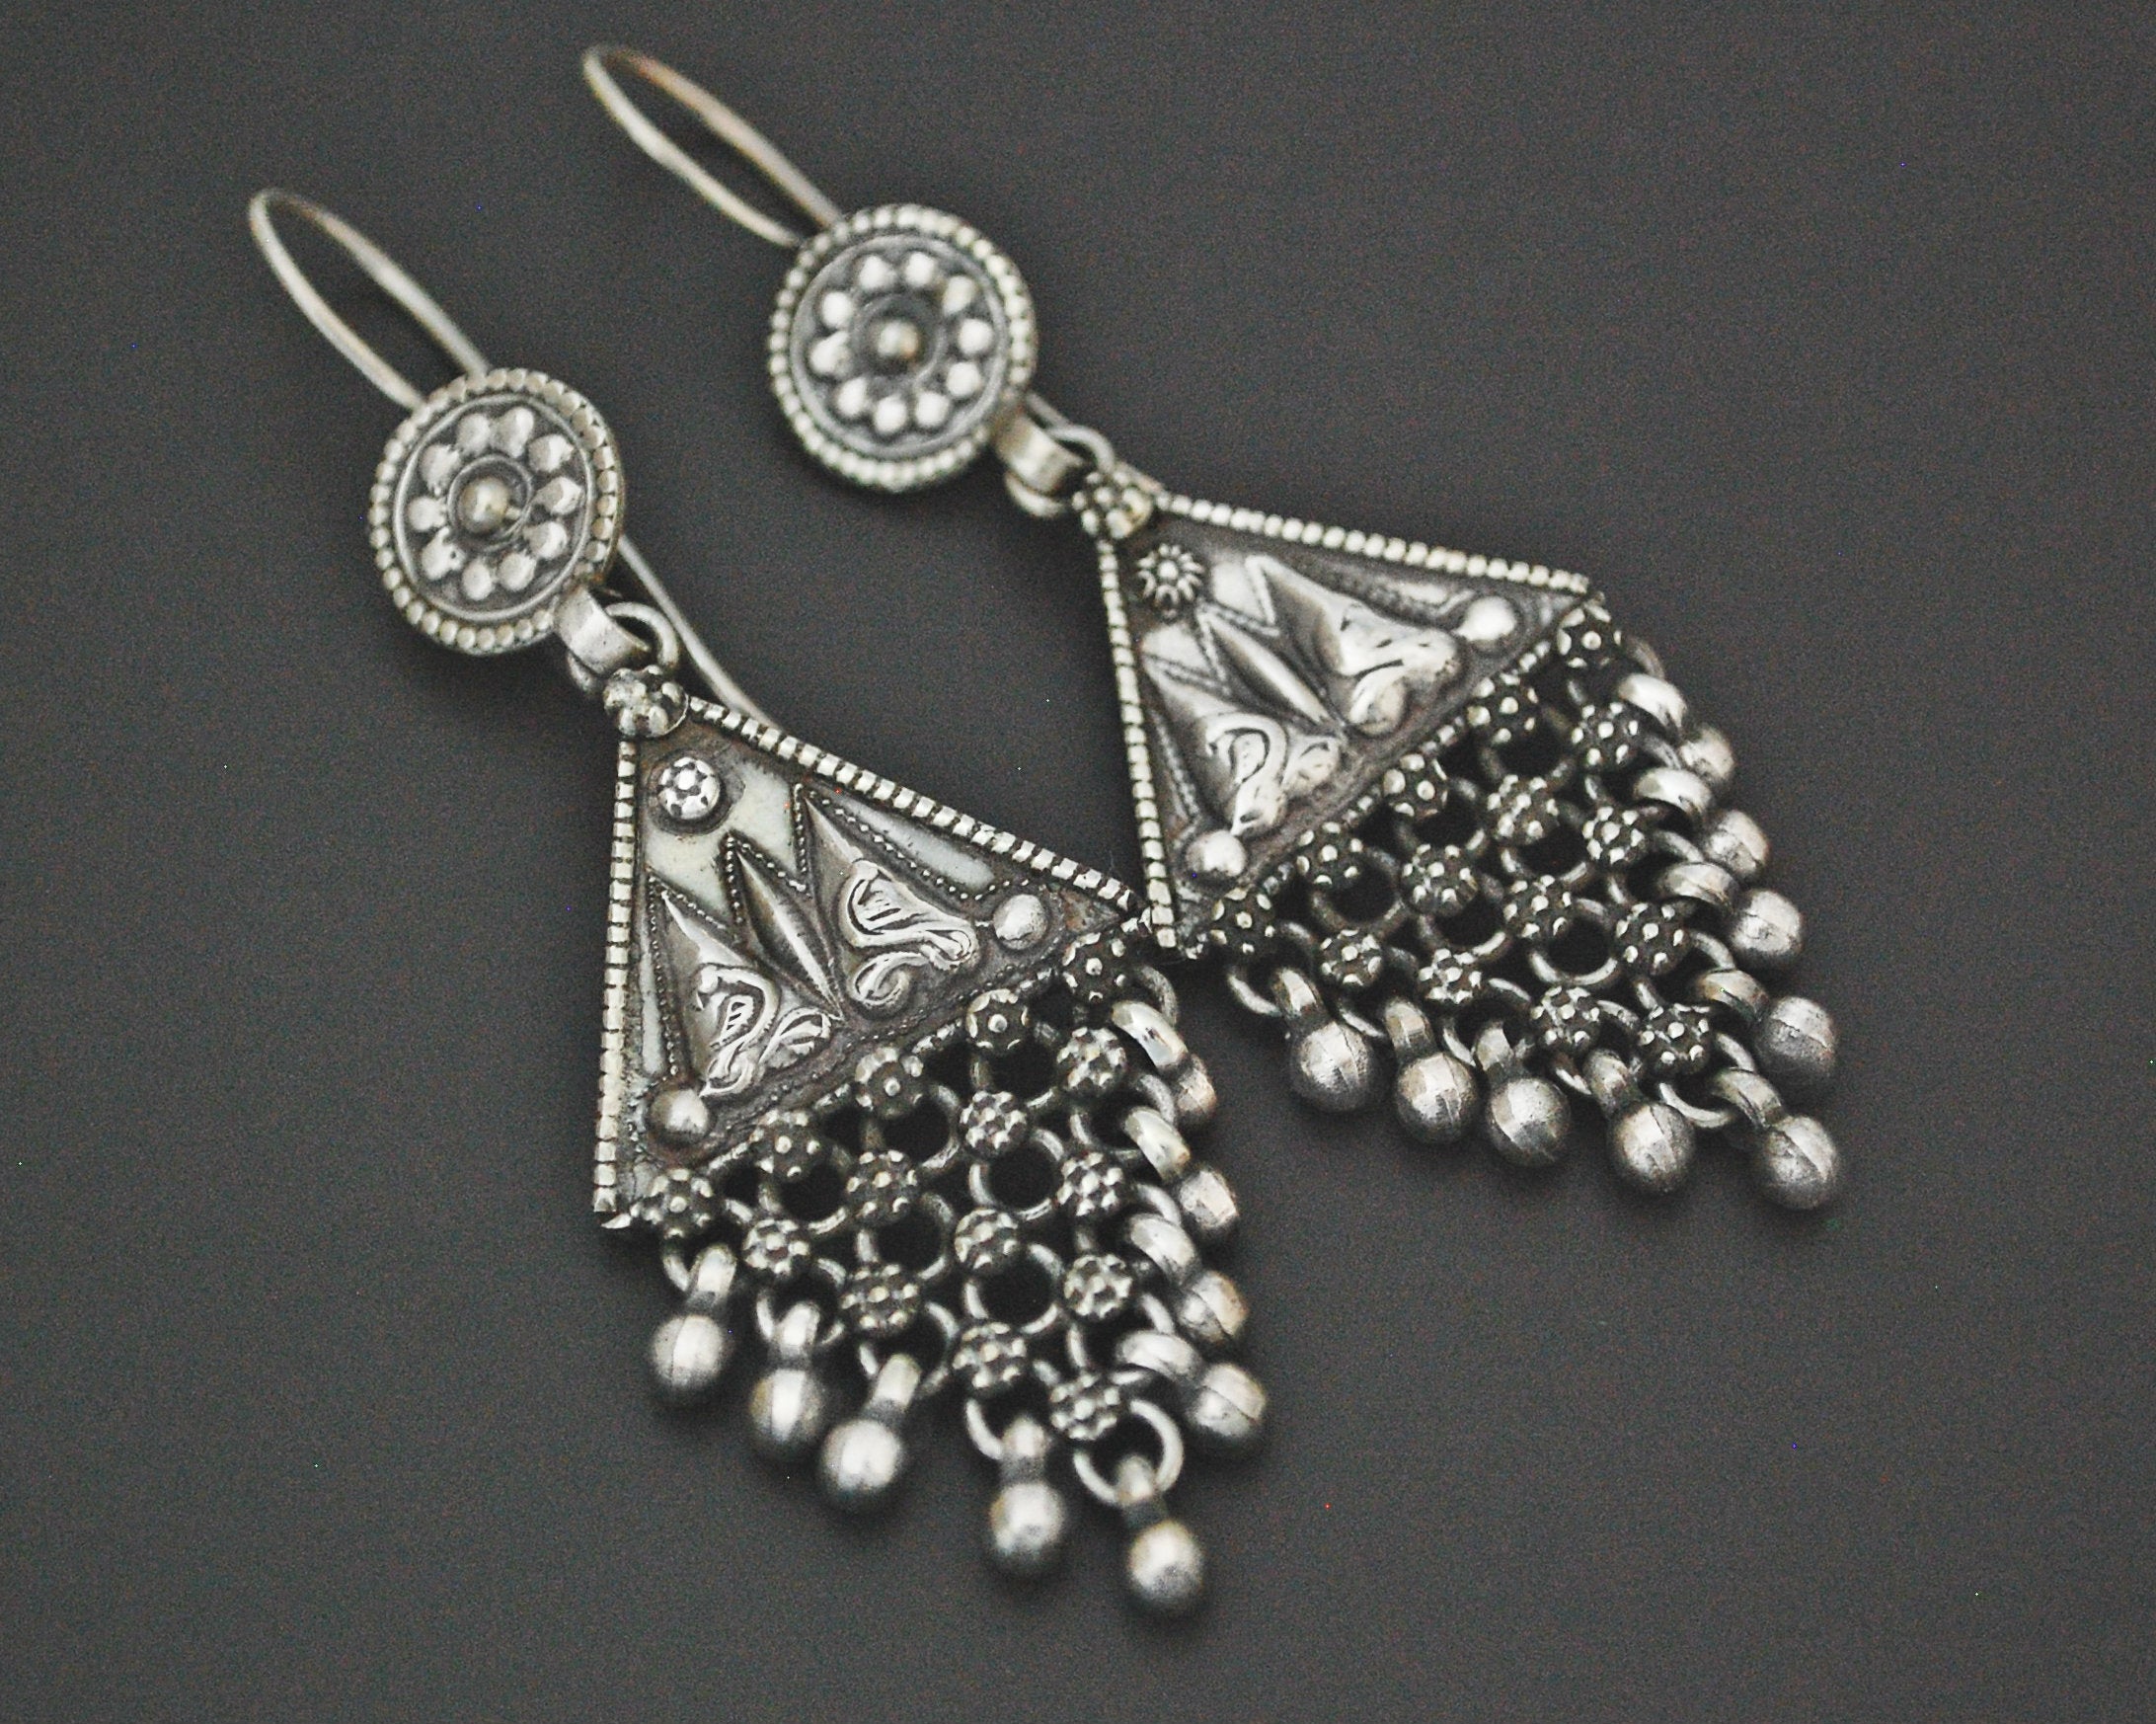 Long Rajasthani Silver Earrings with Dangles